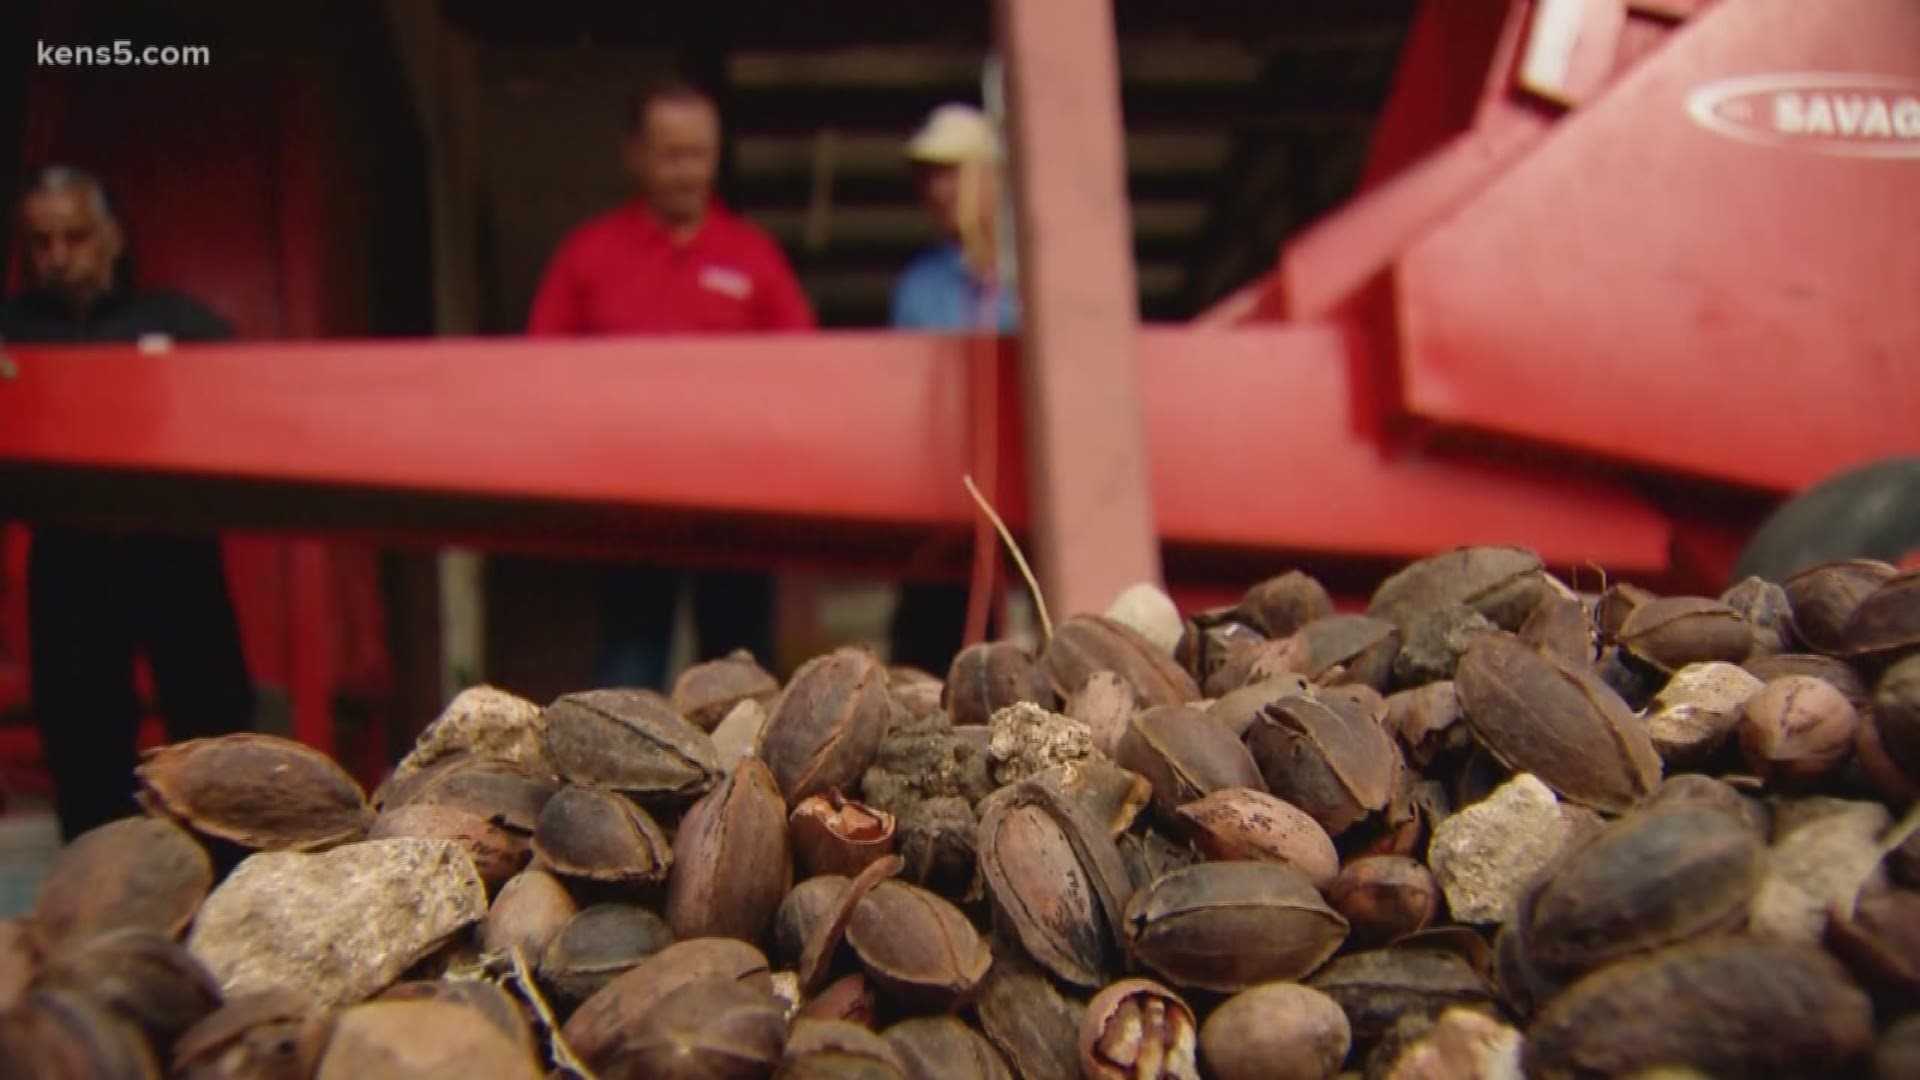 Have you ever wondered what it takes to get the pecans from your favorite pecan pie on the market? We found out in this week's Texas Outdoors.